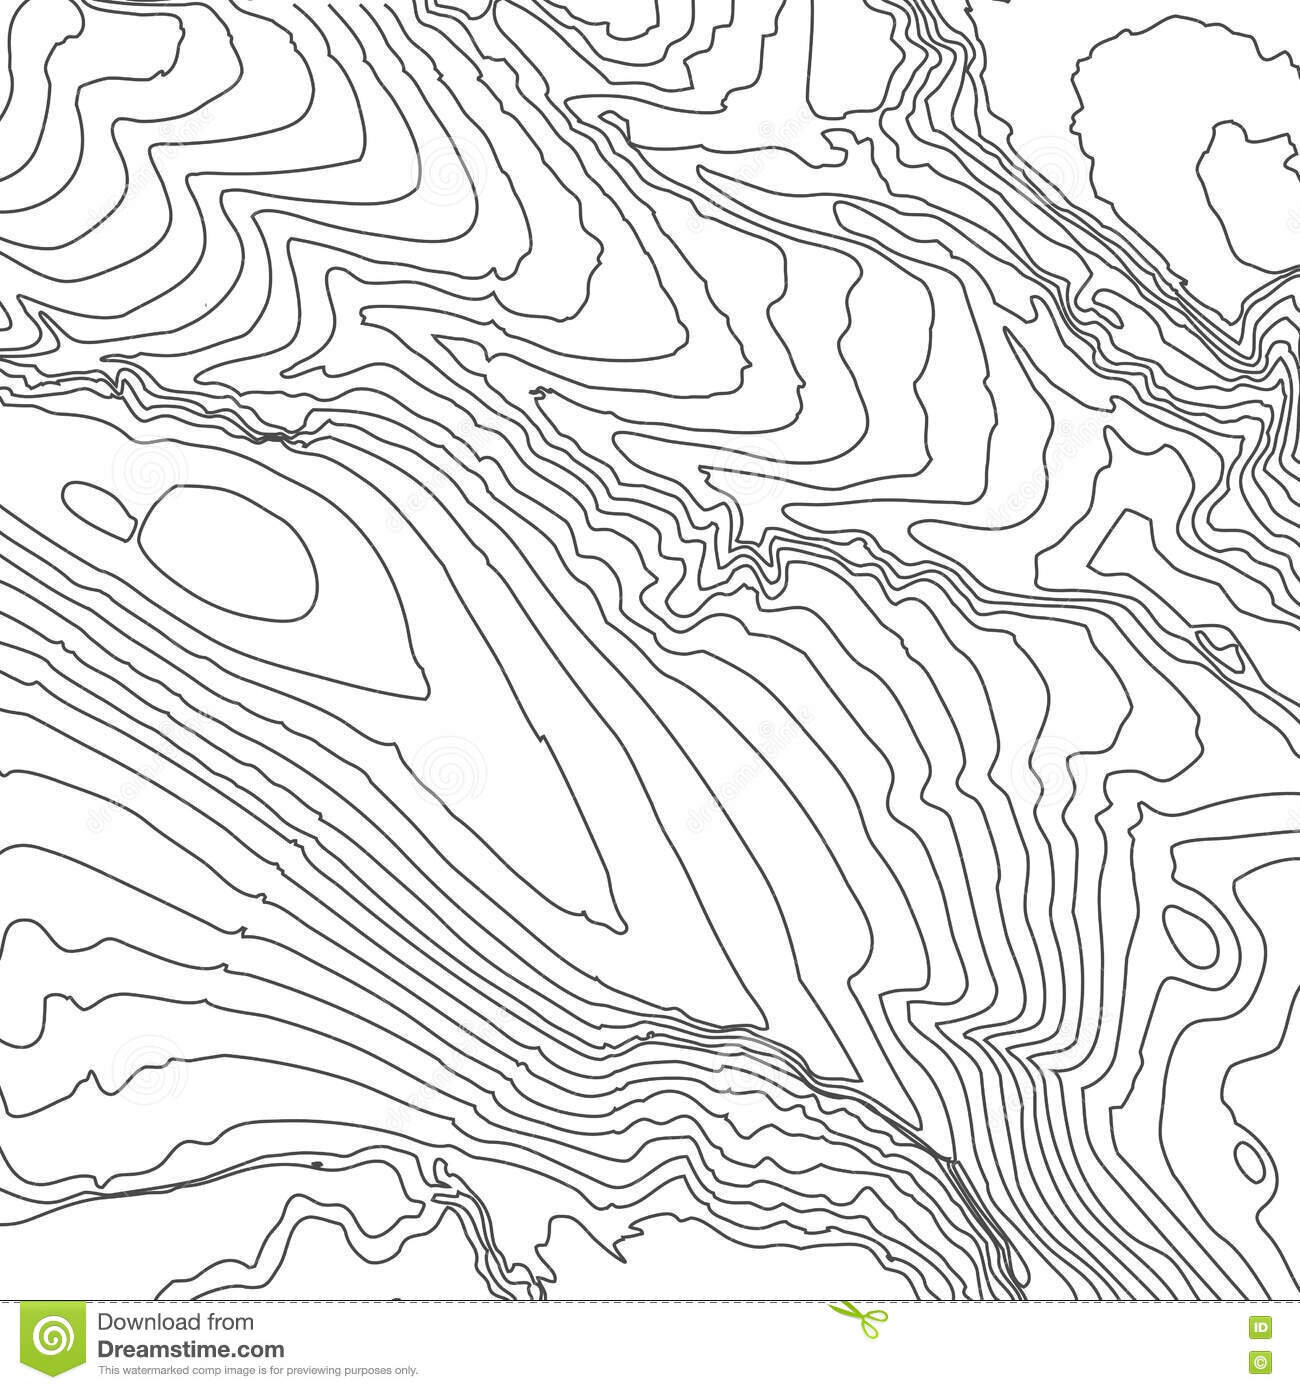 topographic-map-background-concept-space-your-copy-topography-lines-art-contour-mountain-hiking-trail-77005602